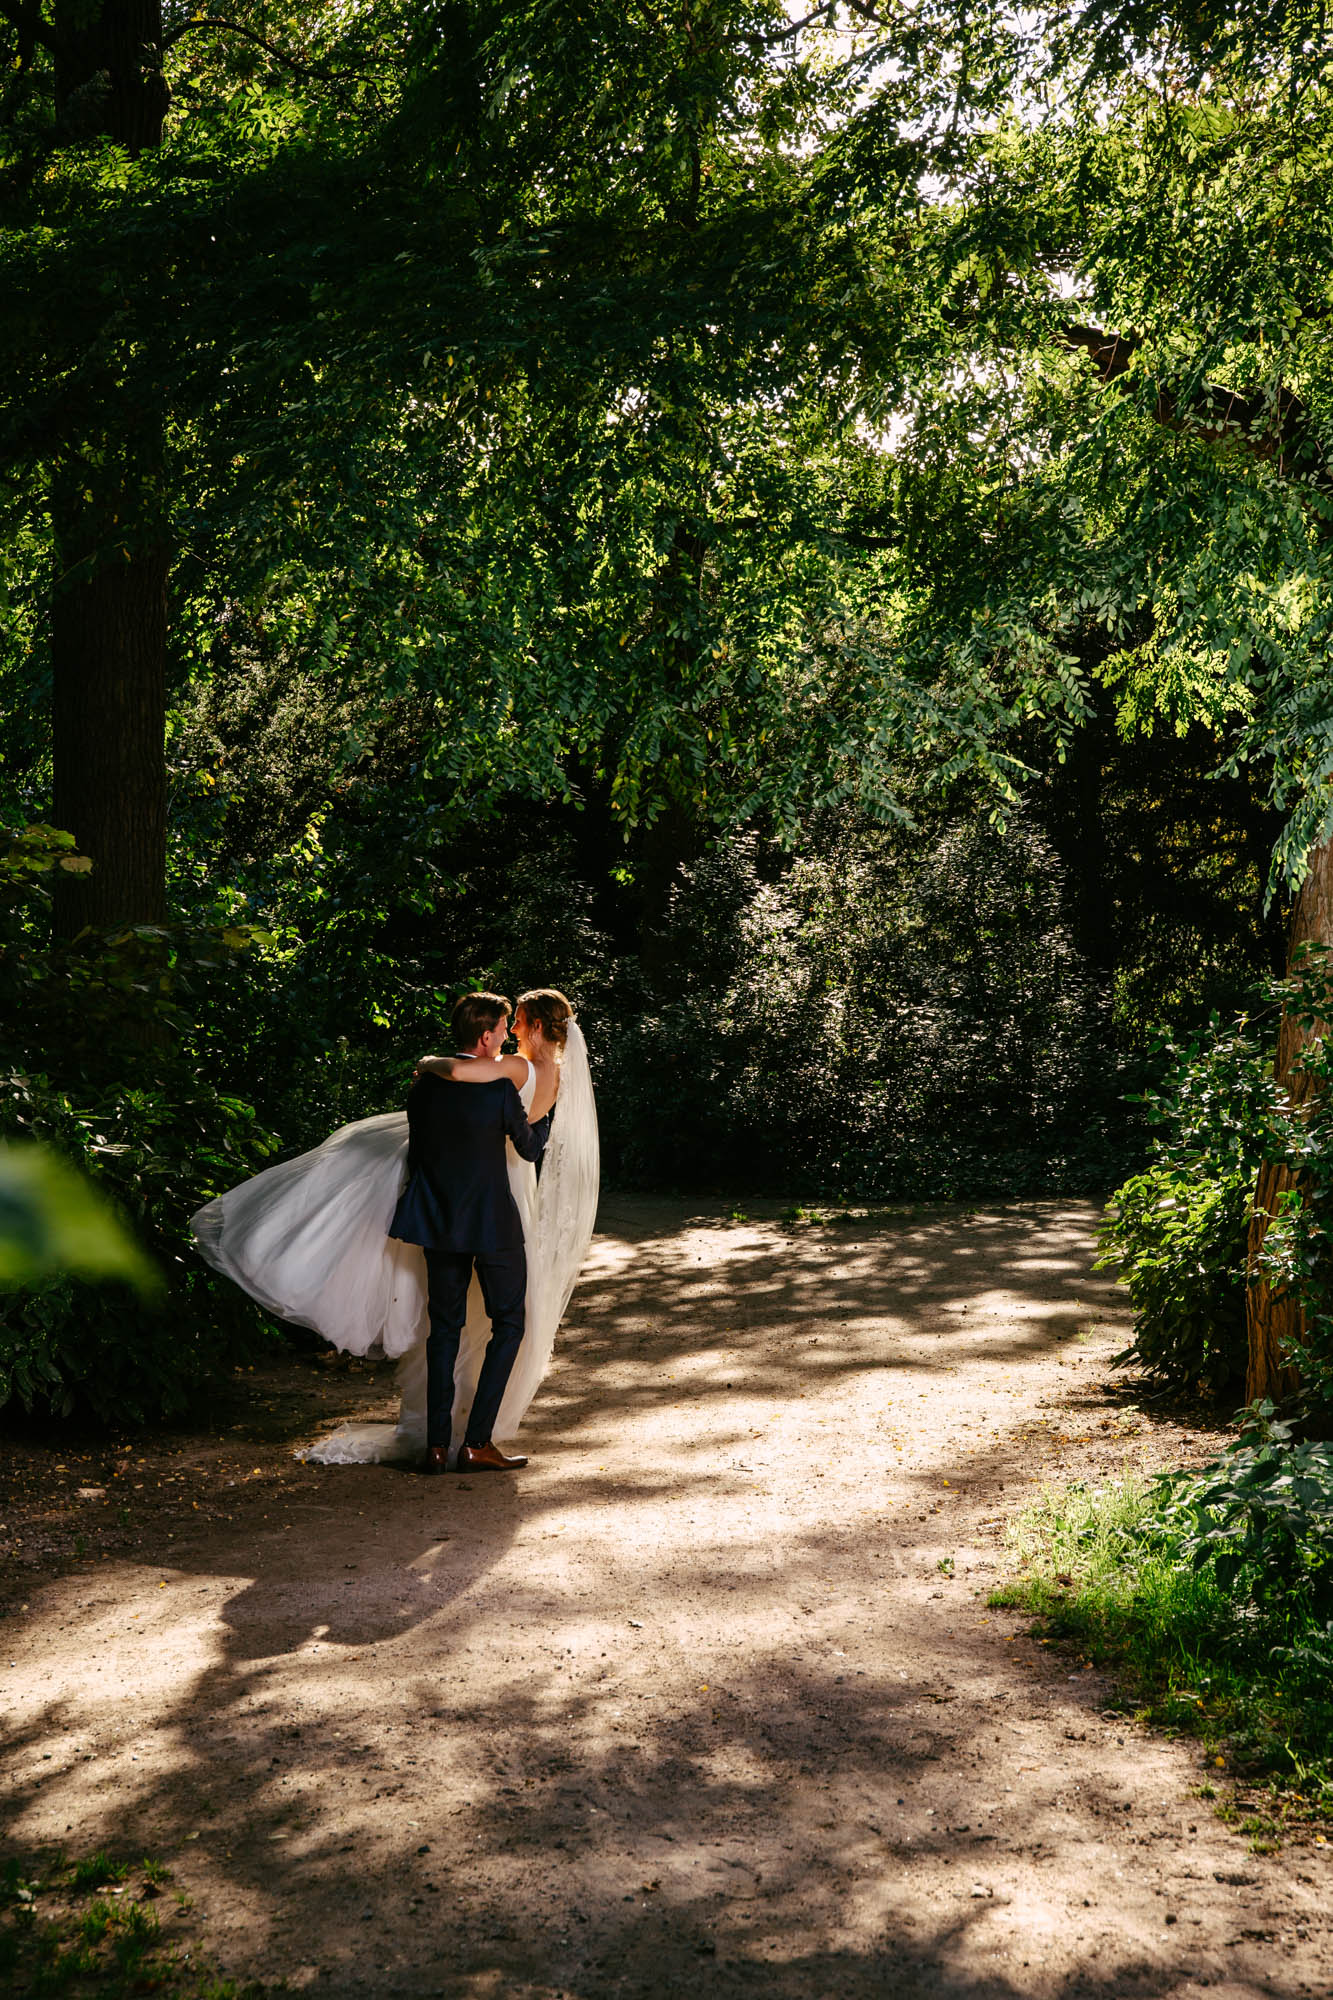 A relaxed bride and groom hugging each other in the forest during their wedding ceremony.